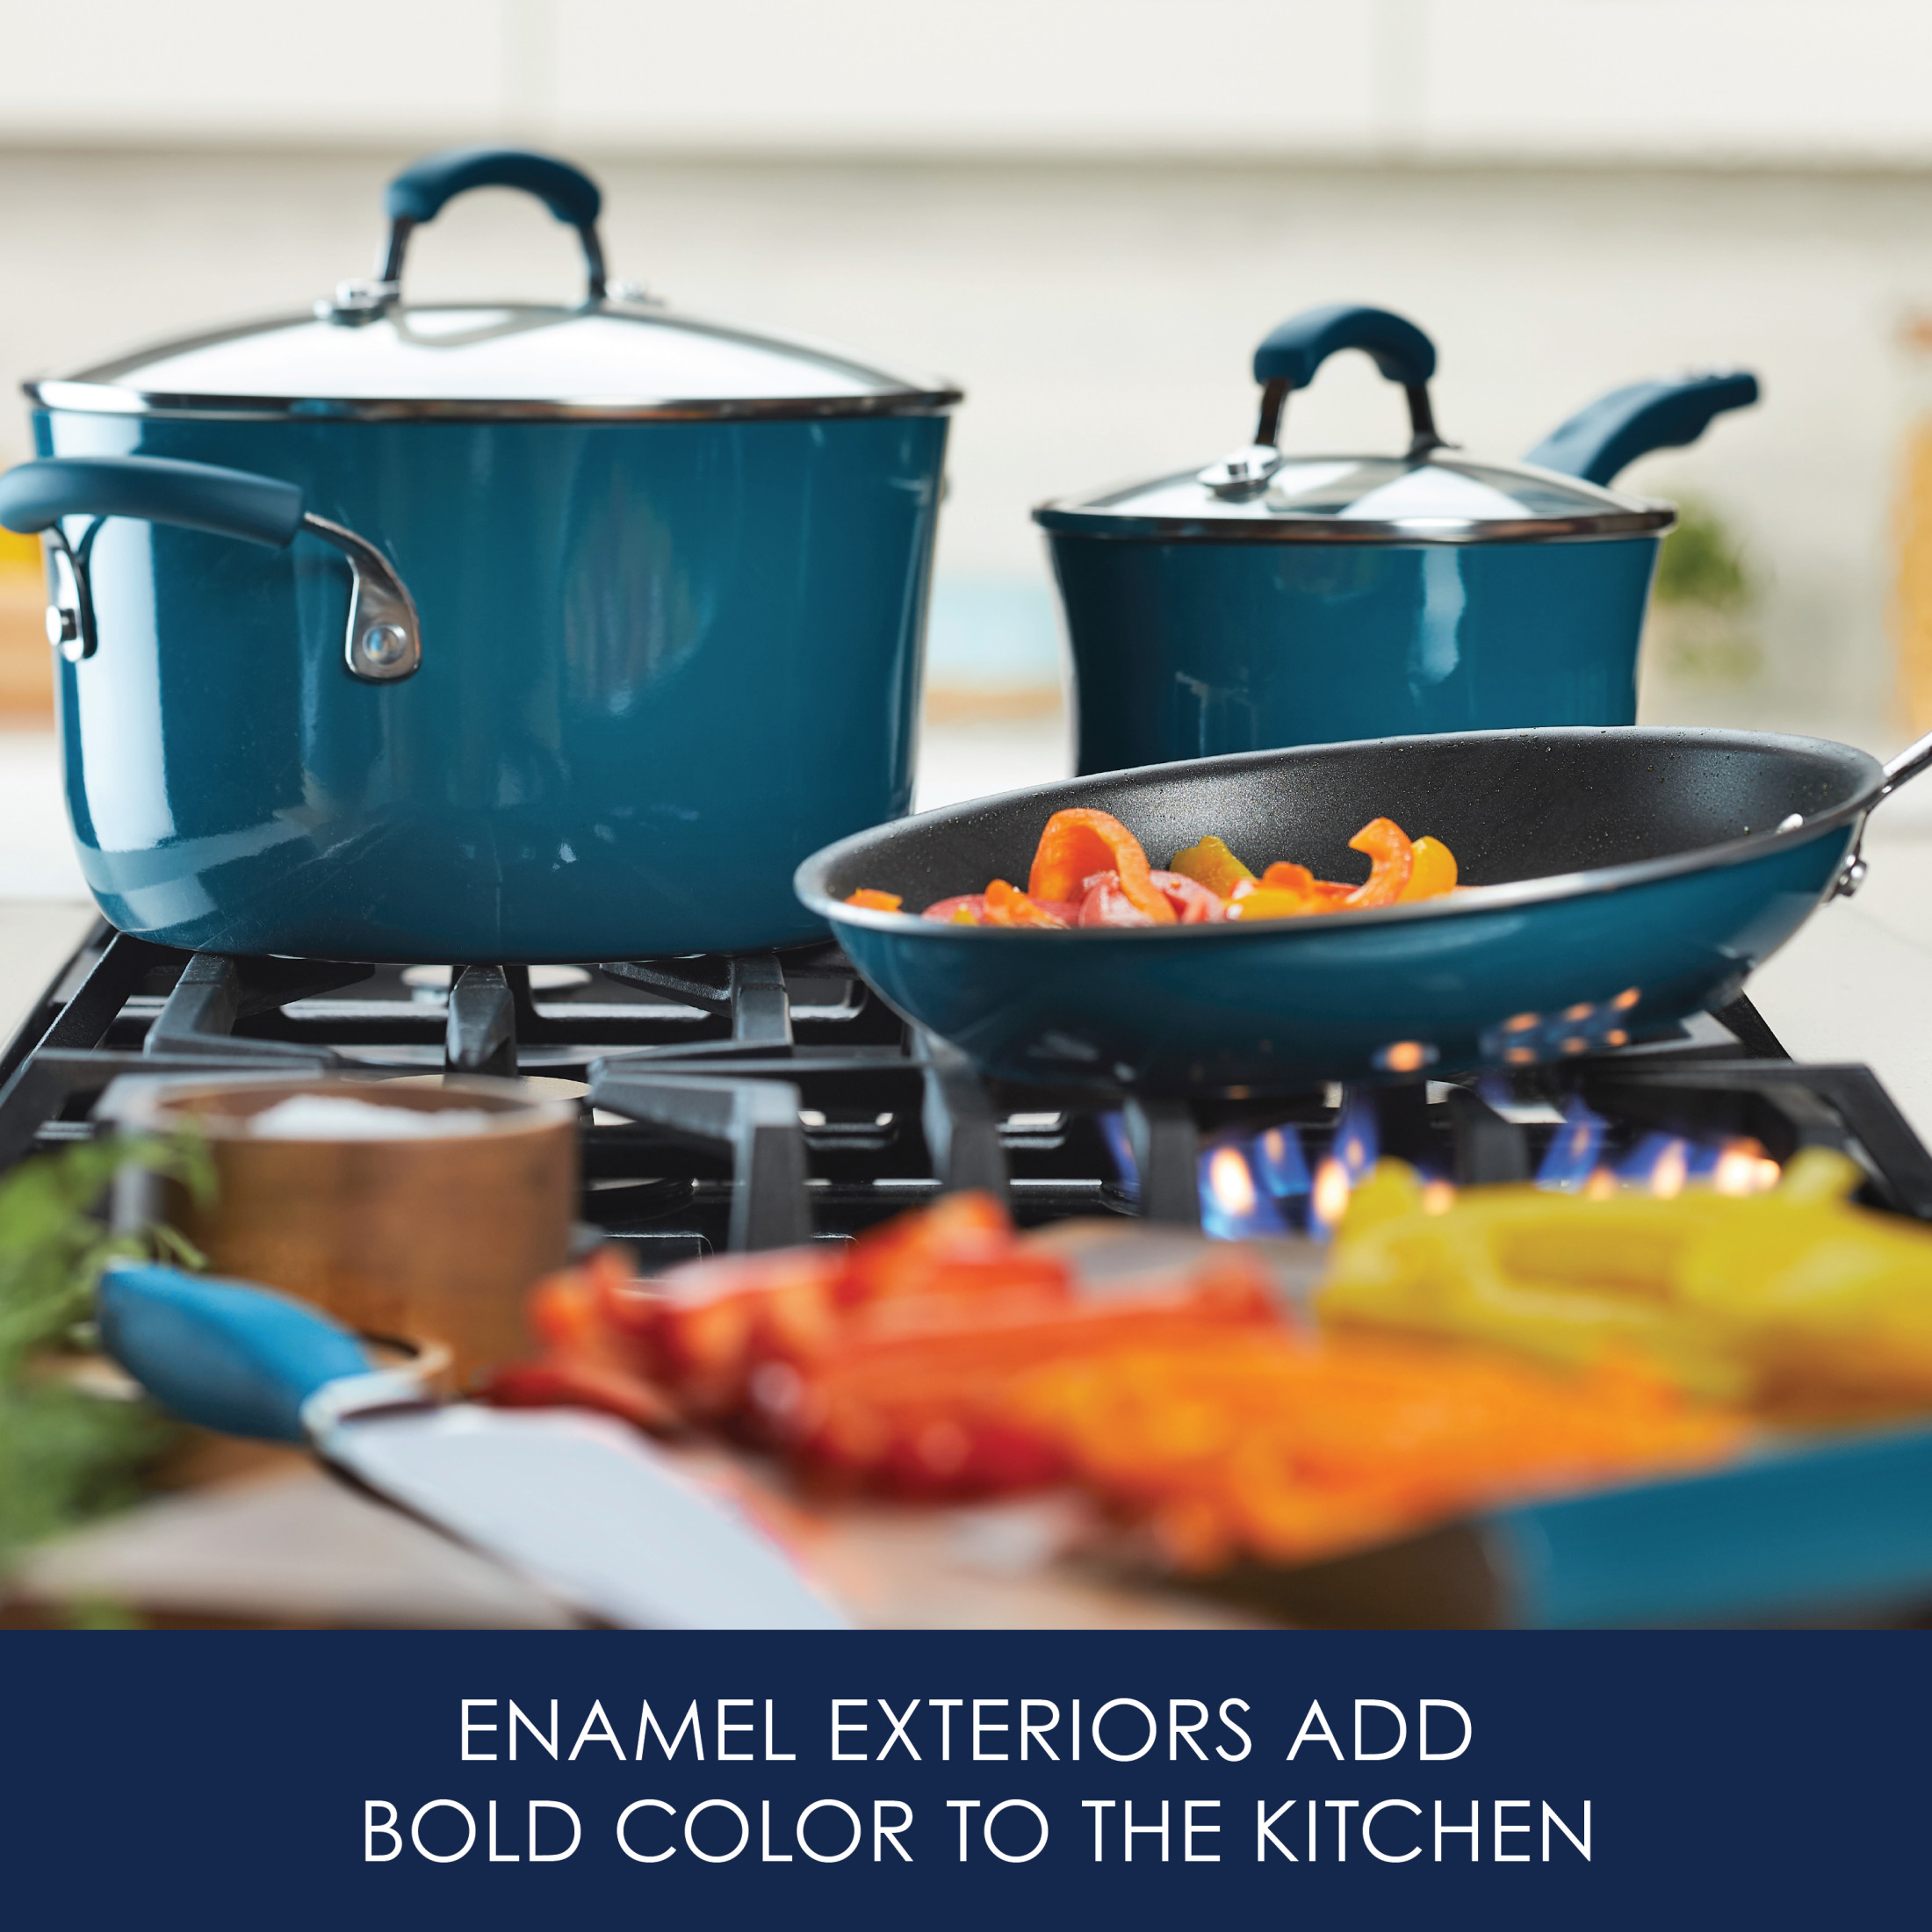 Rachael Ray 15 Piece Nonstick Pots and Pans Set, Marine Blue - image 4 of 15